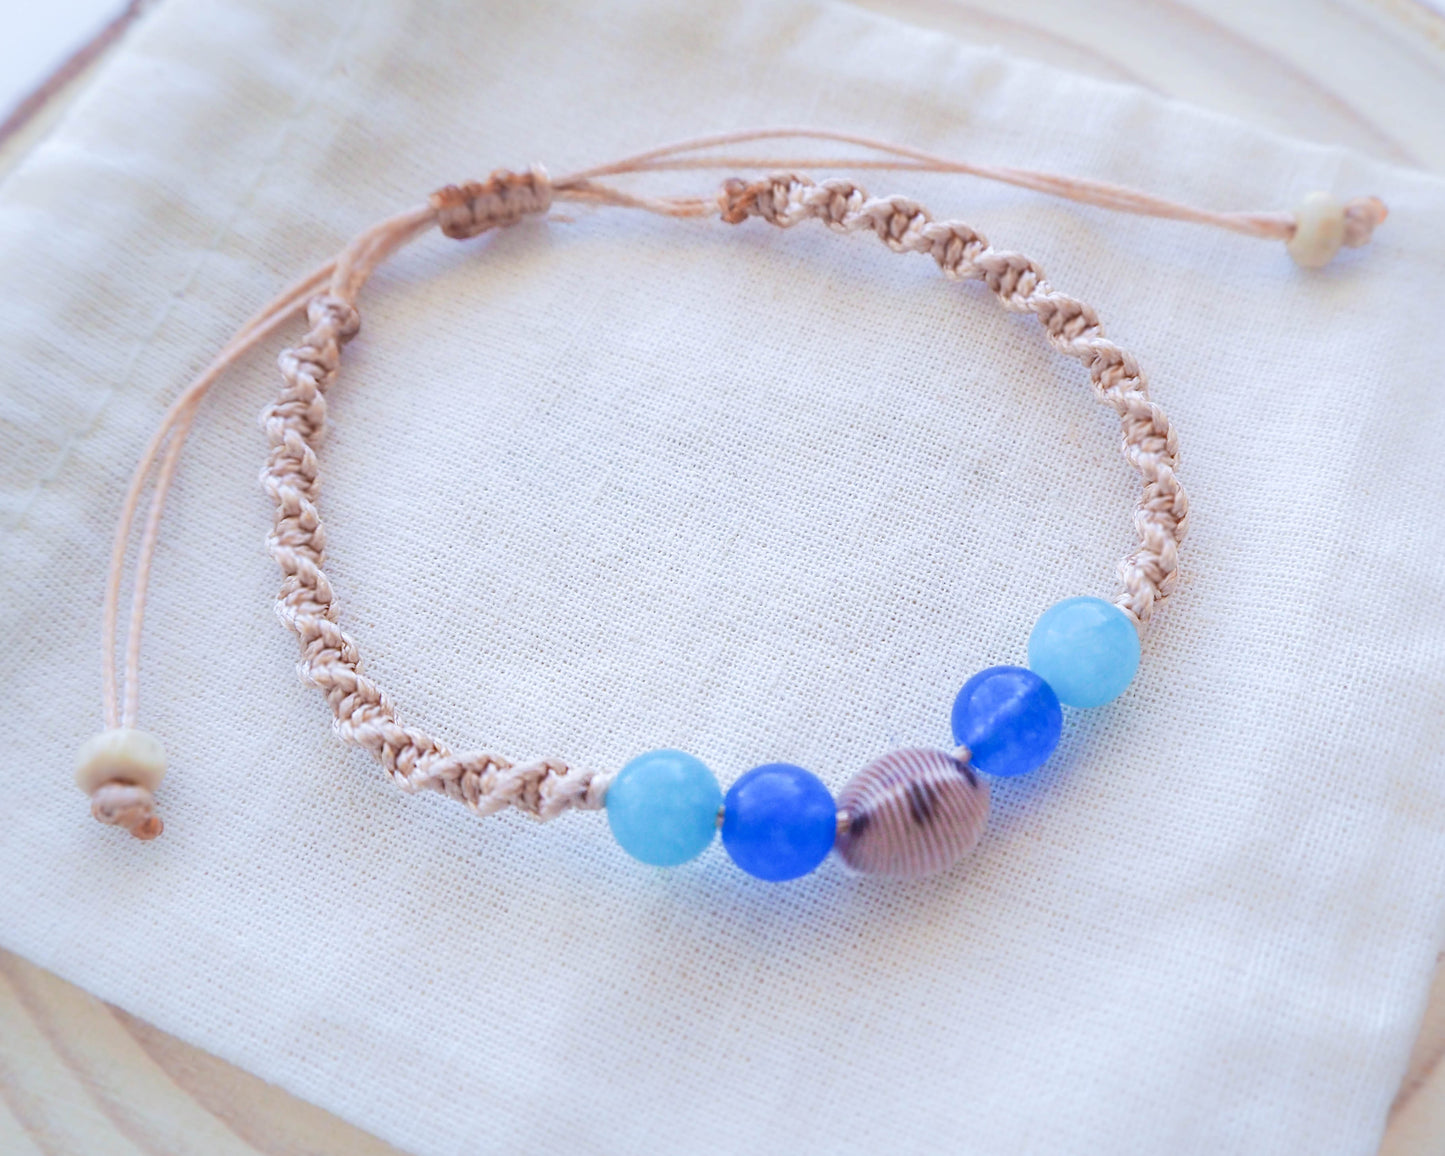 close-up of the aquamarine and blue agate beads, adding a touch of tranquility and harmony to the Cowrie Shell Bracelet.